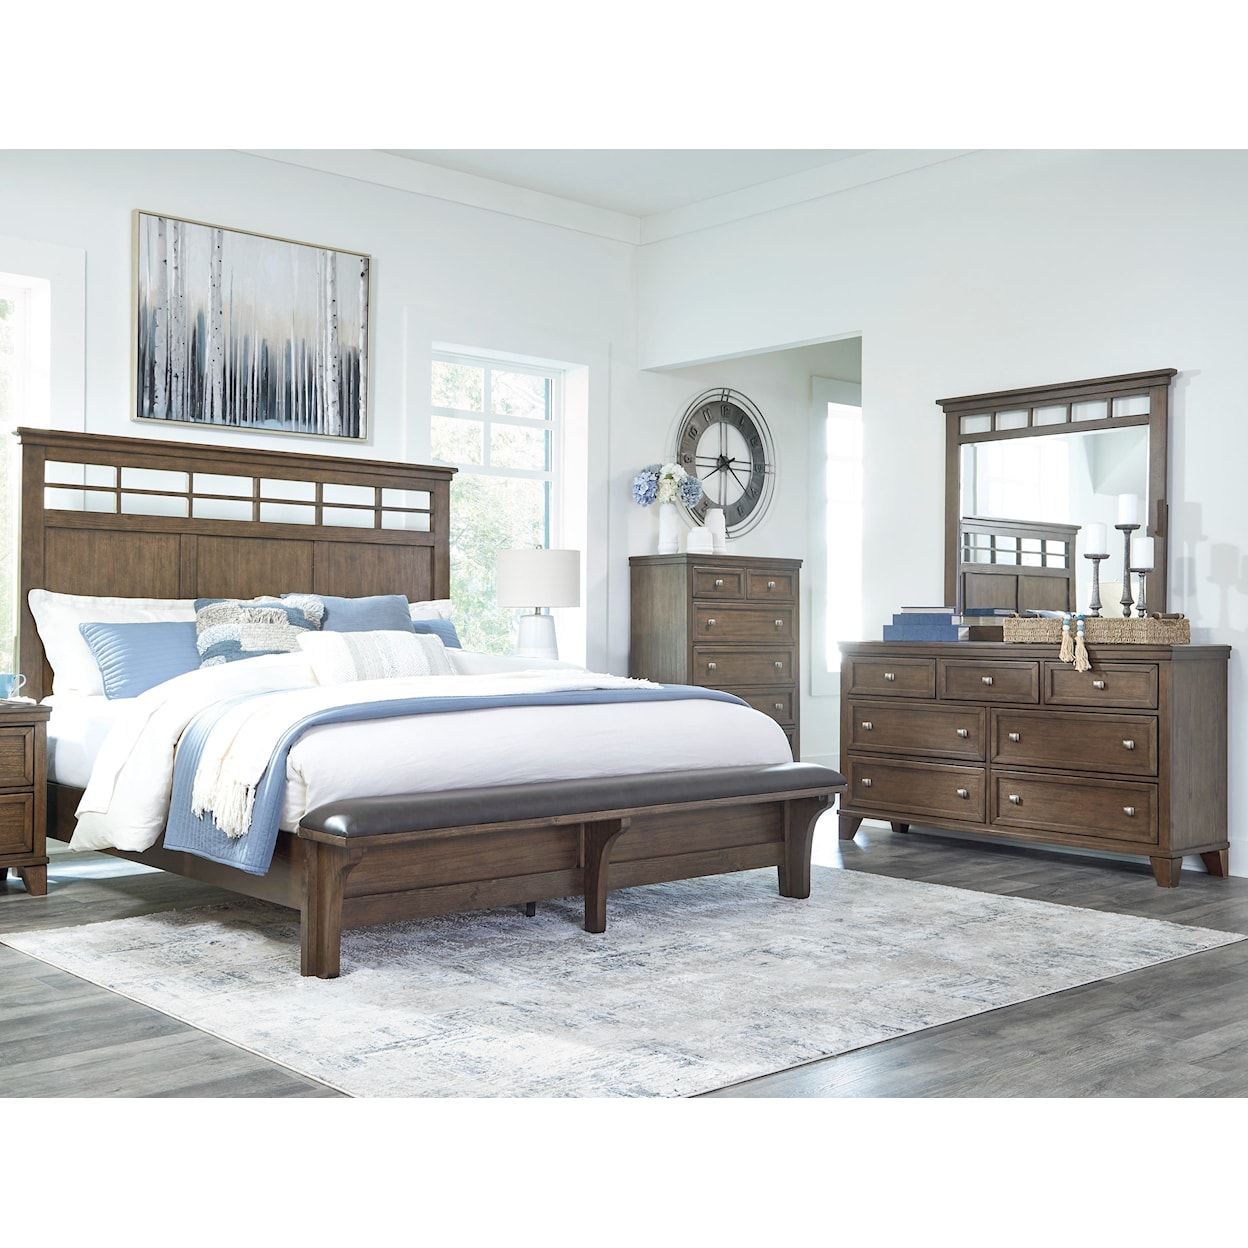 Ashley Shawbeck Queen Bedroom Group